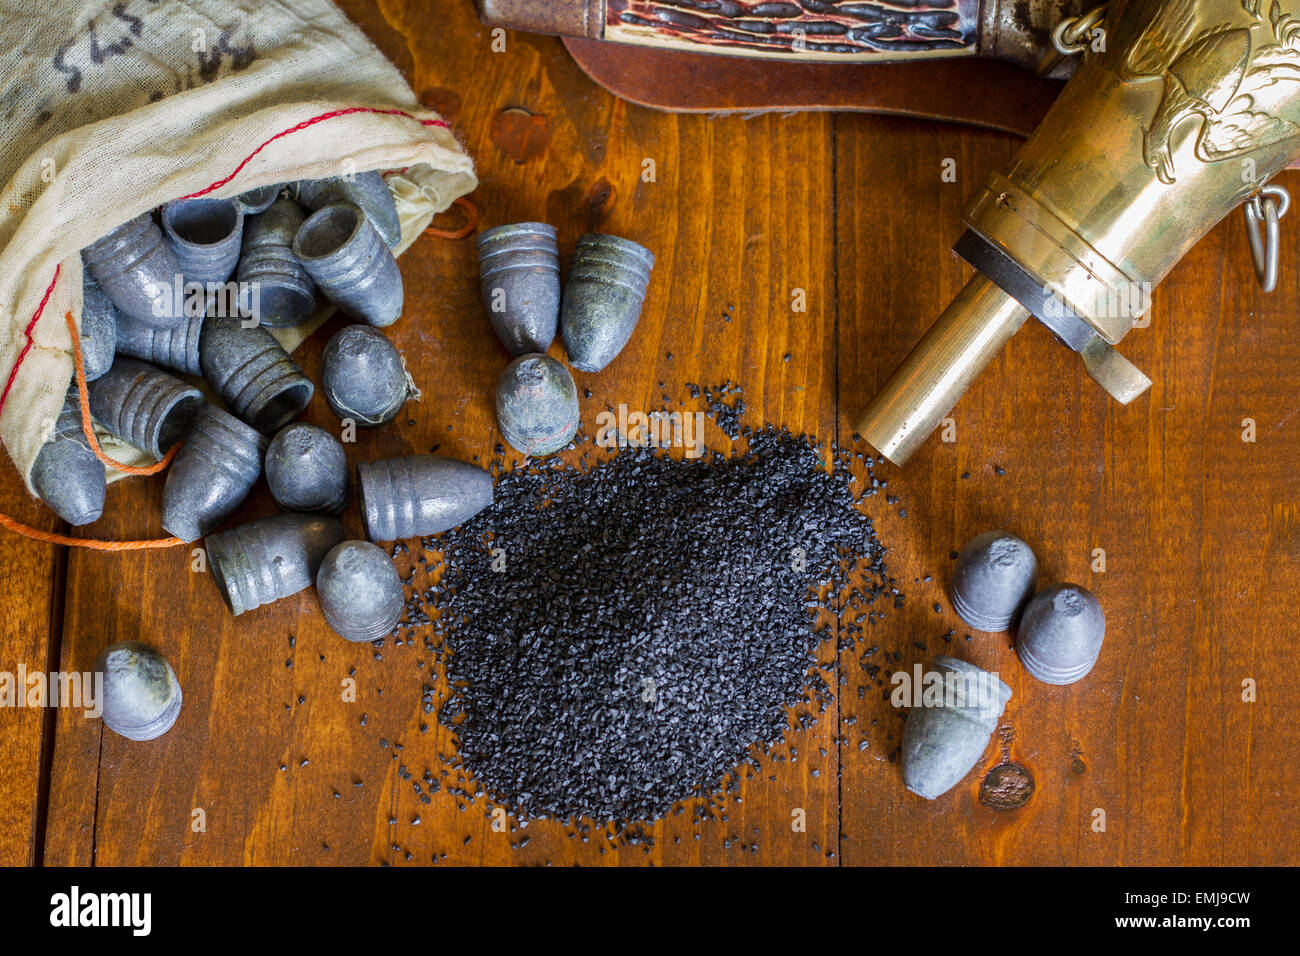 646 Smokeless Powder Images, Stock Photos, 3D objects, & Vectors